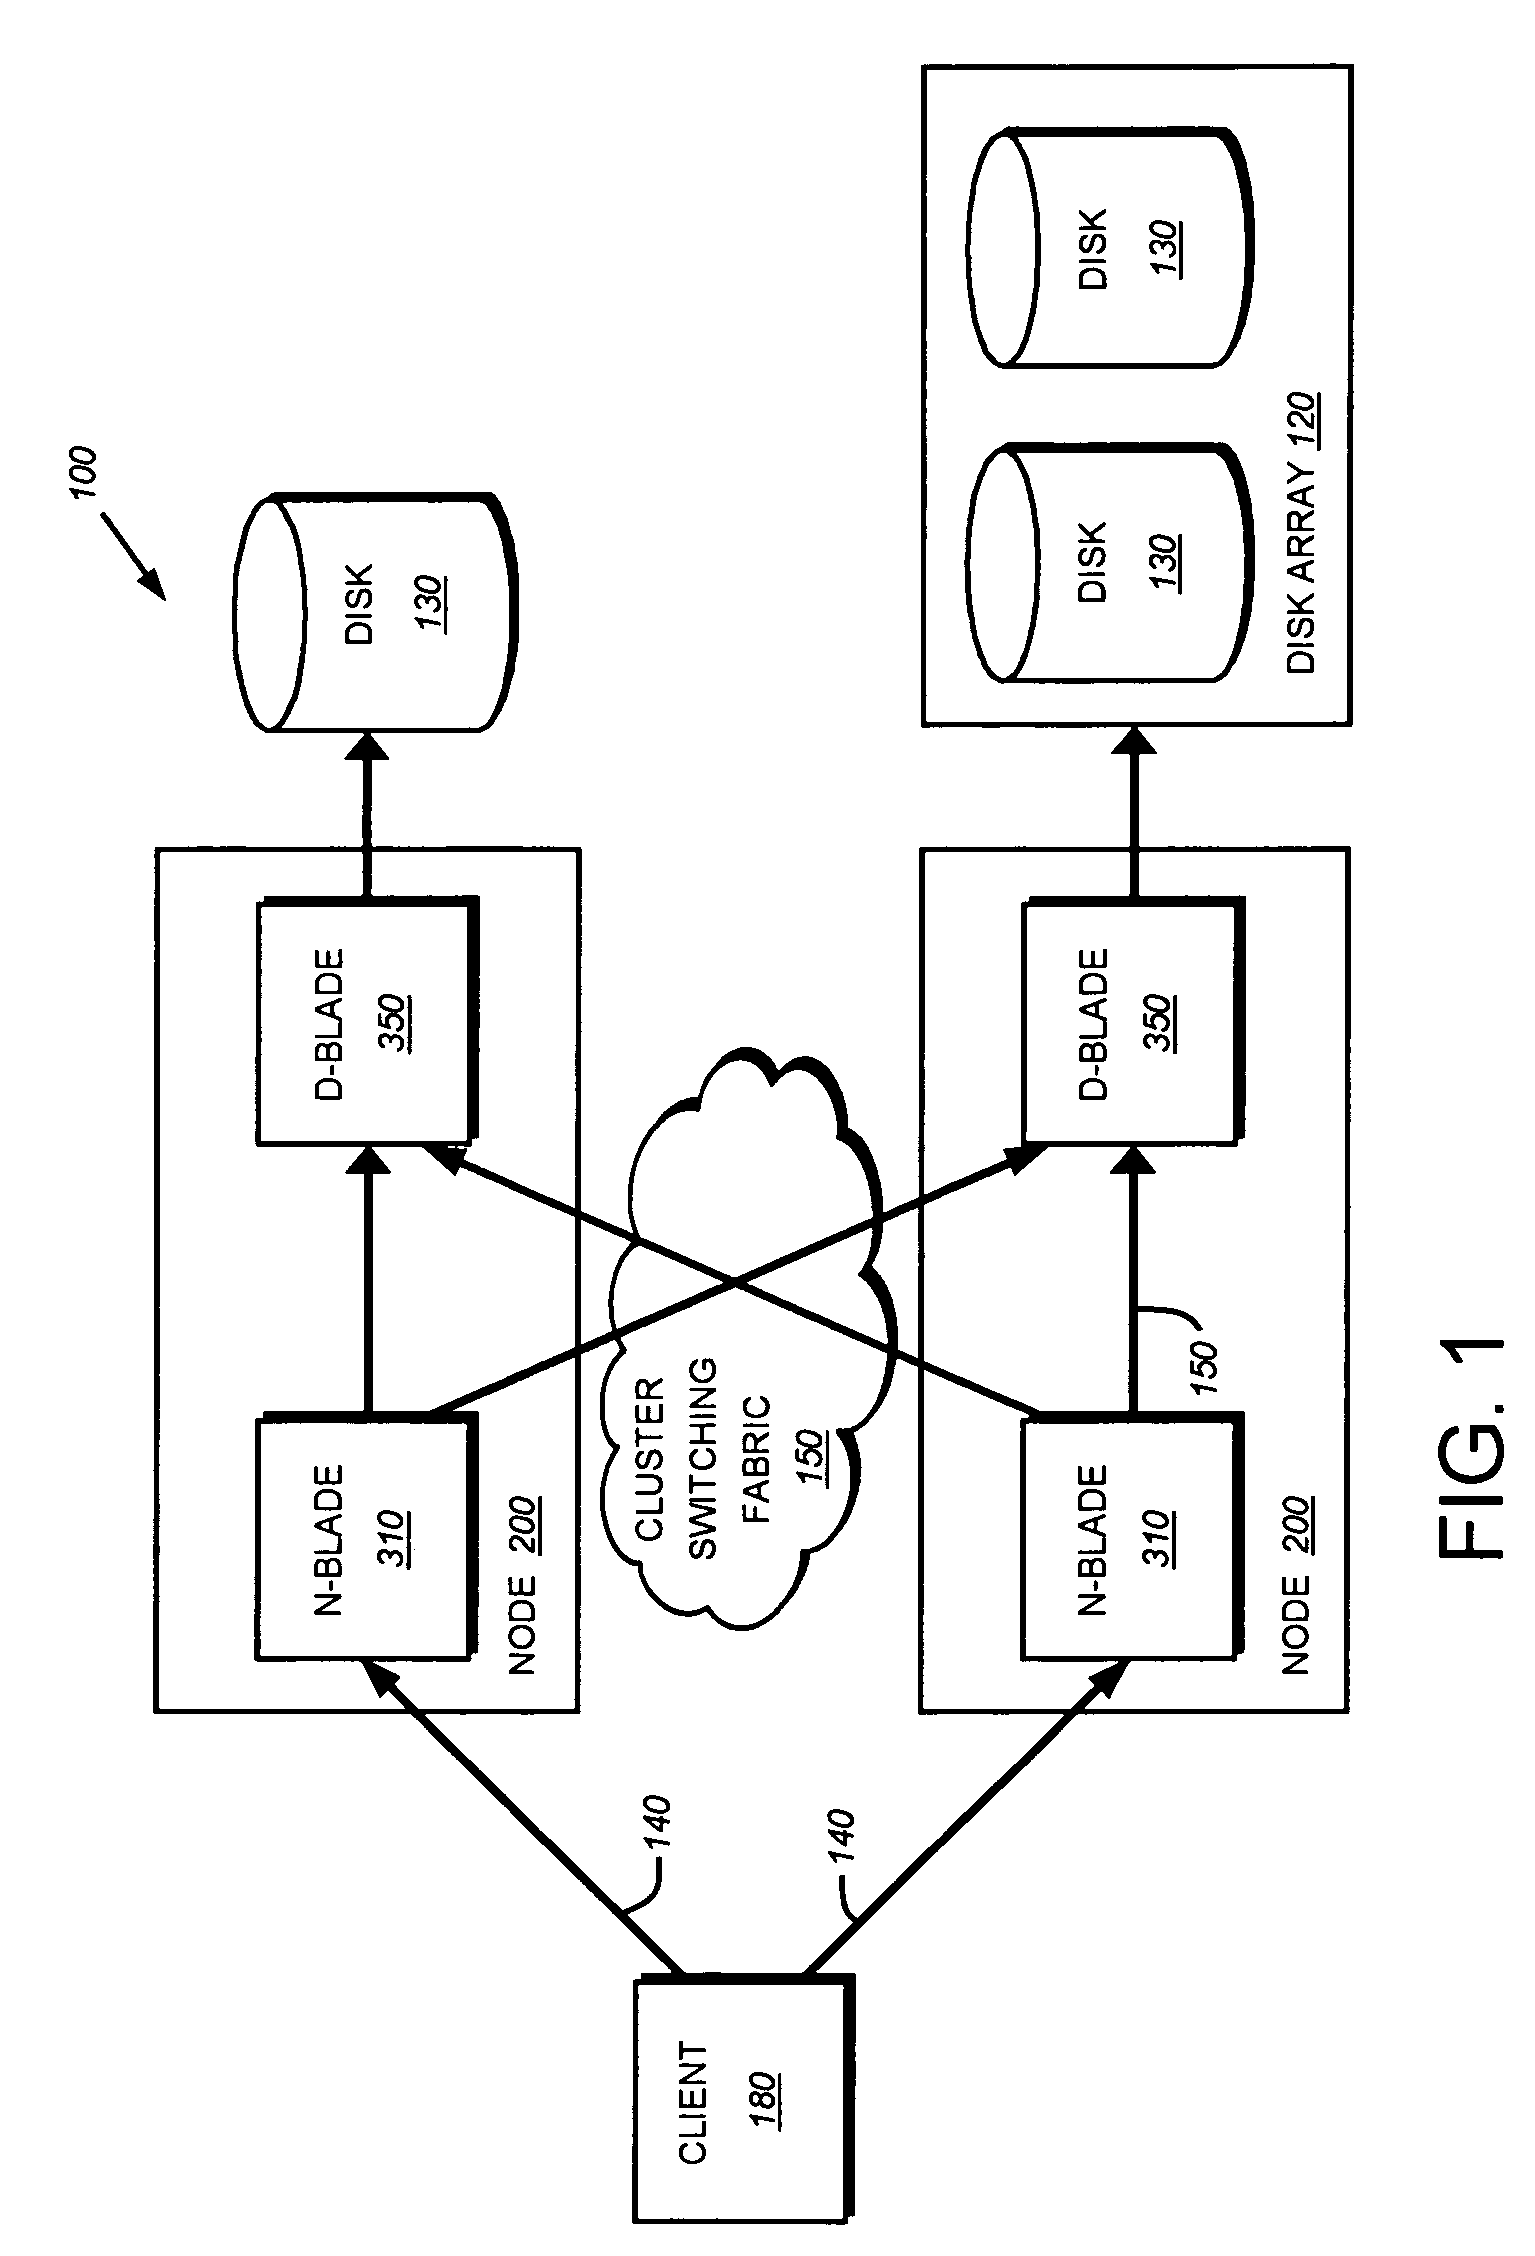 System and method for multiplexing channels over multiple connections in a storage system cluster